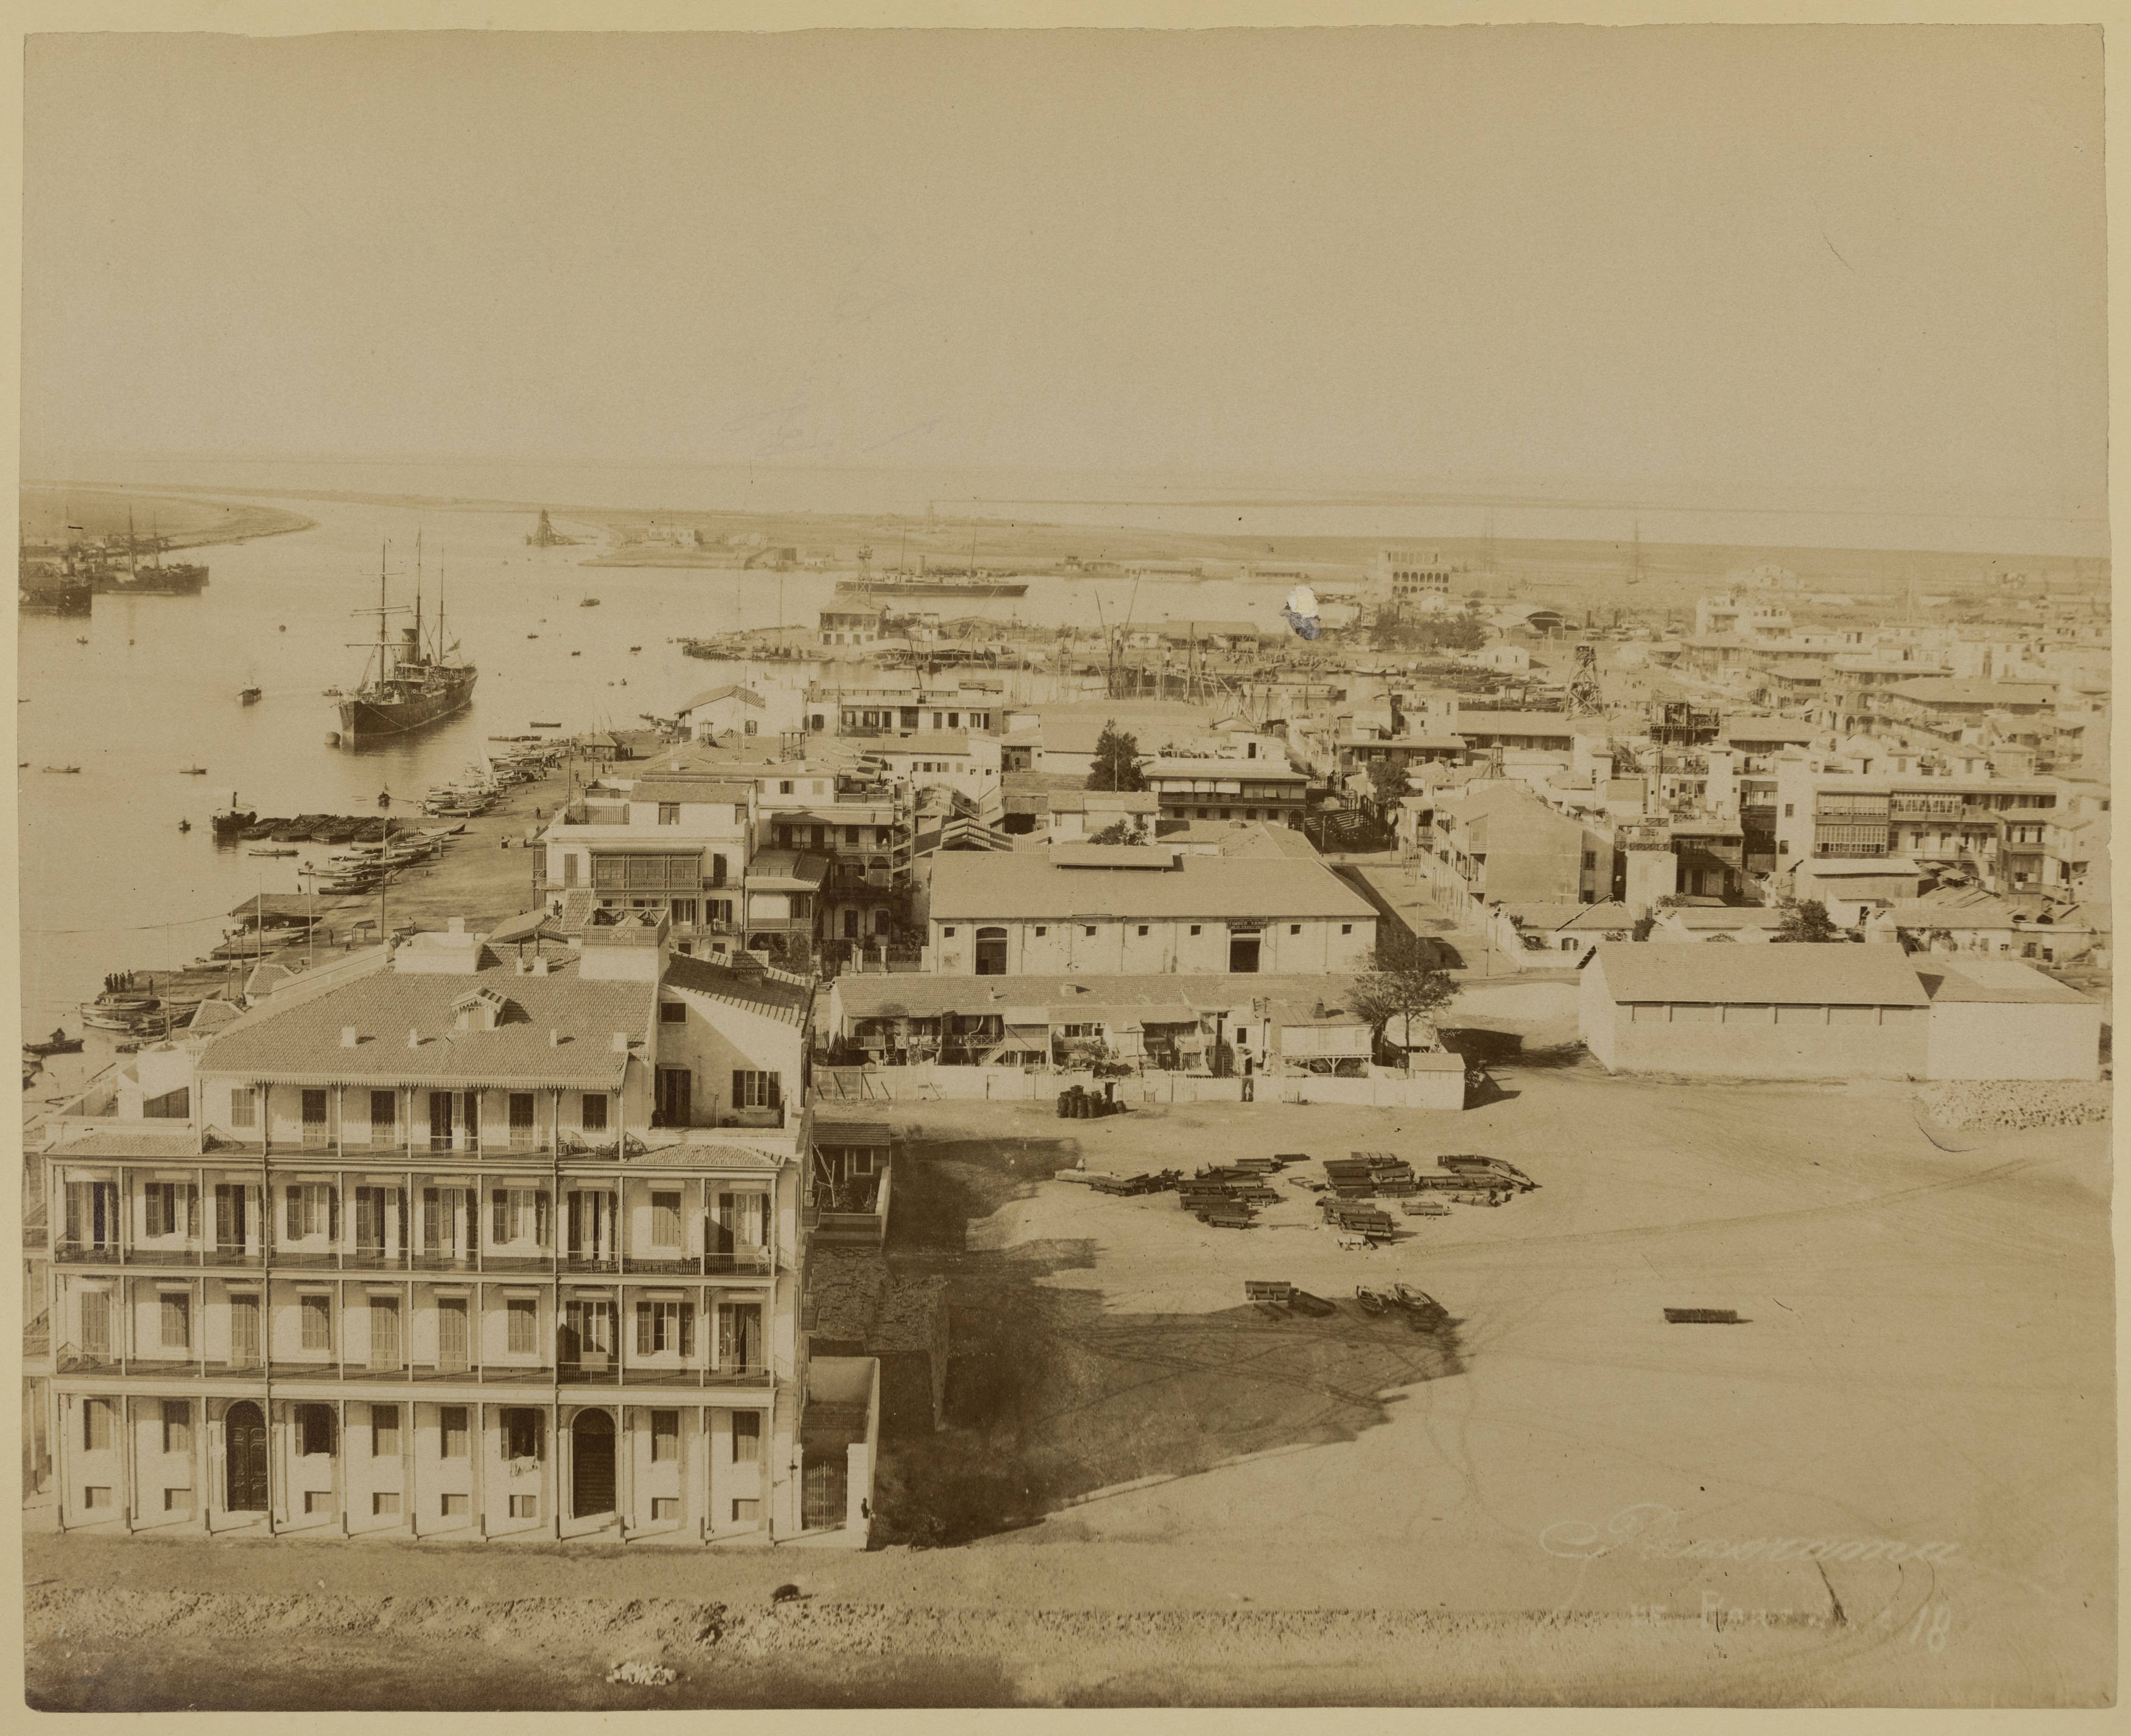 An album of silver prints of views of the Middle East, Late 19th century/first half 20th century... - Image 6 of 8